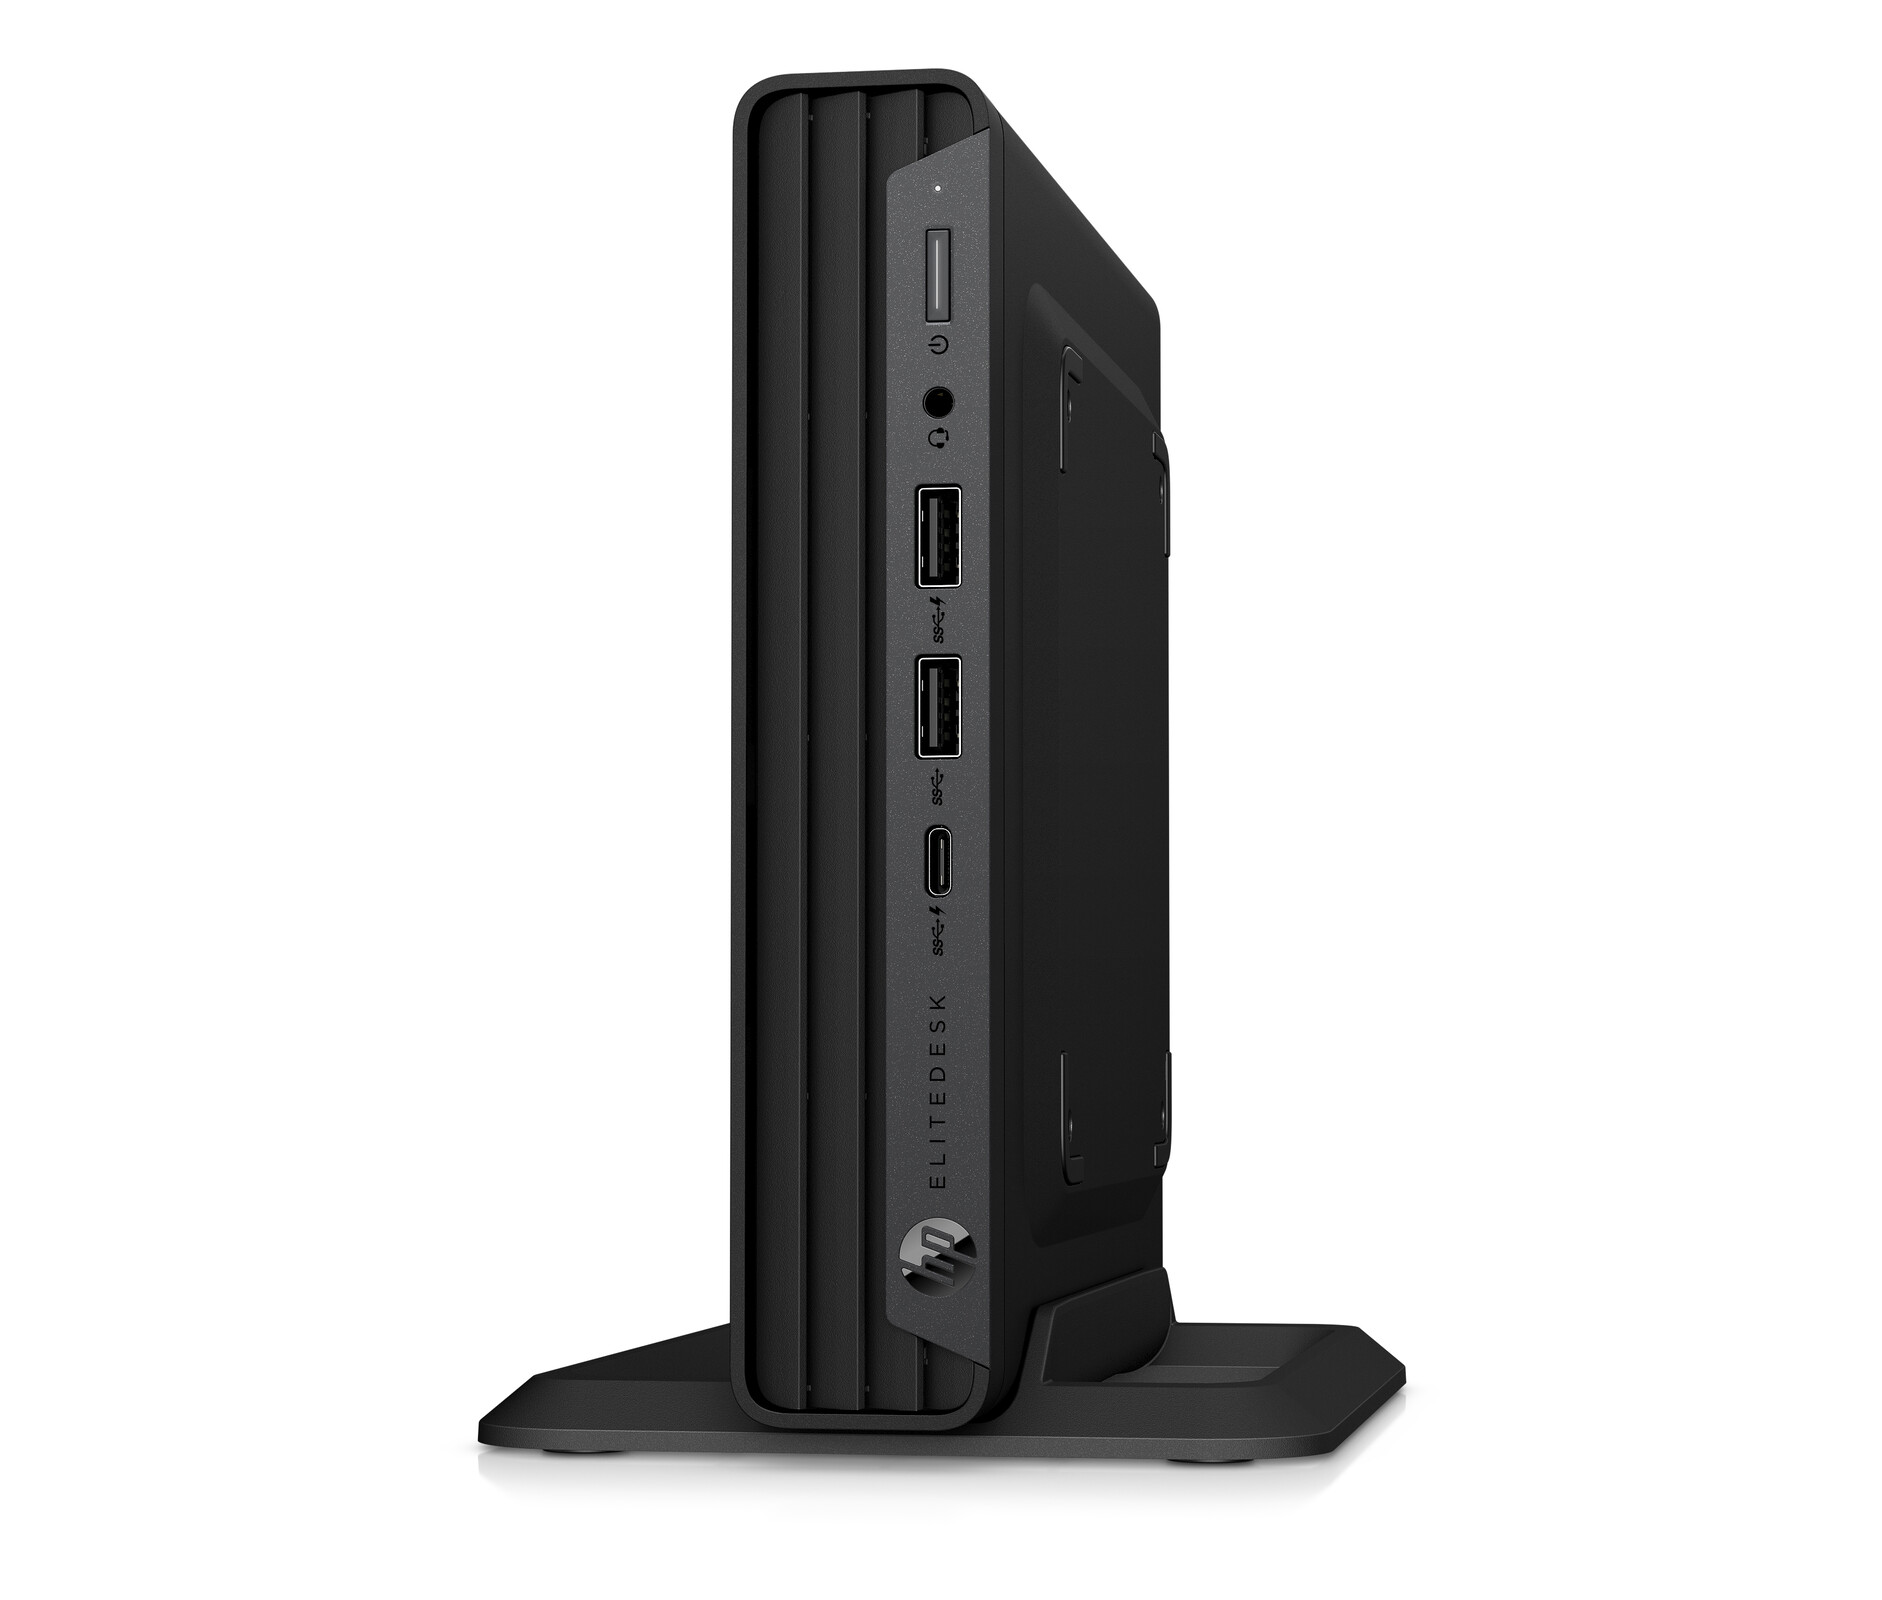 HP EliteDesk 800 G6 Mini PC, SFF, and Tower PC offerings pack